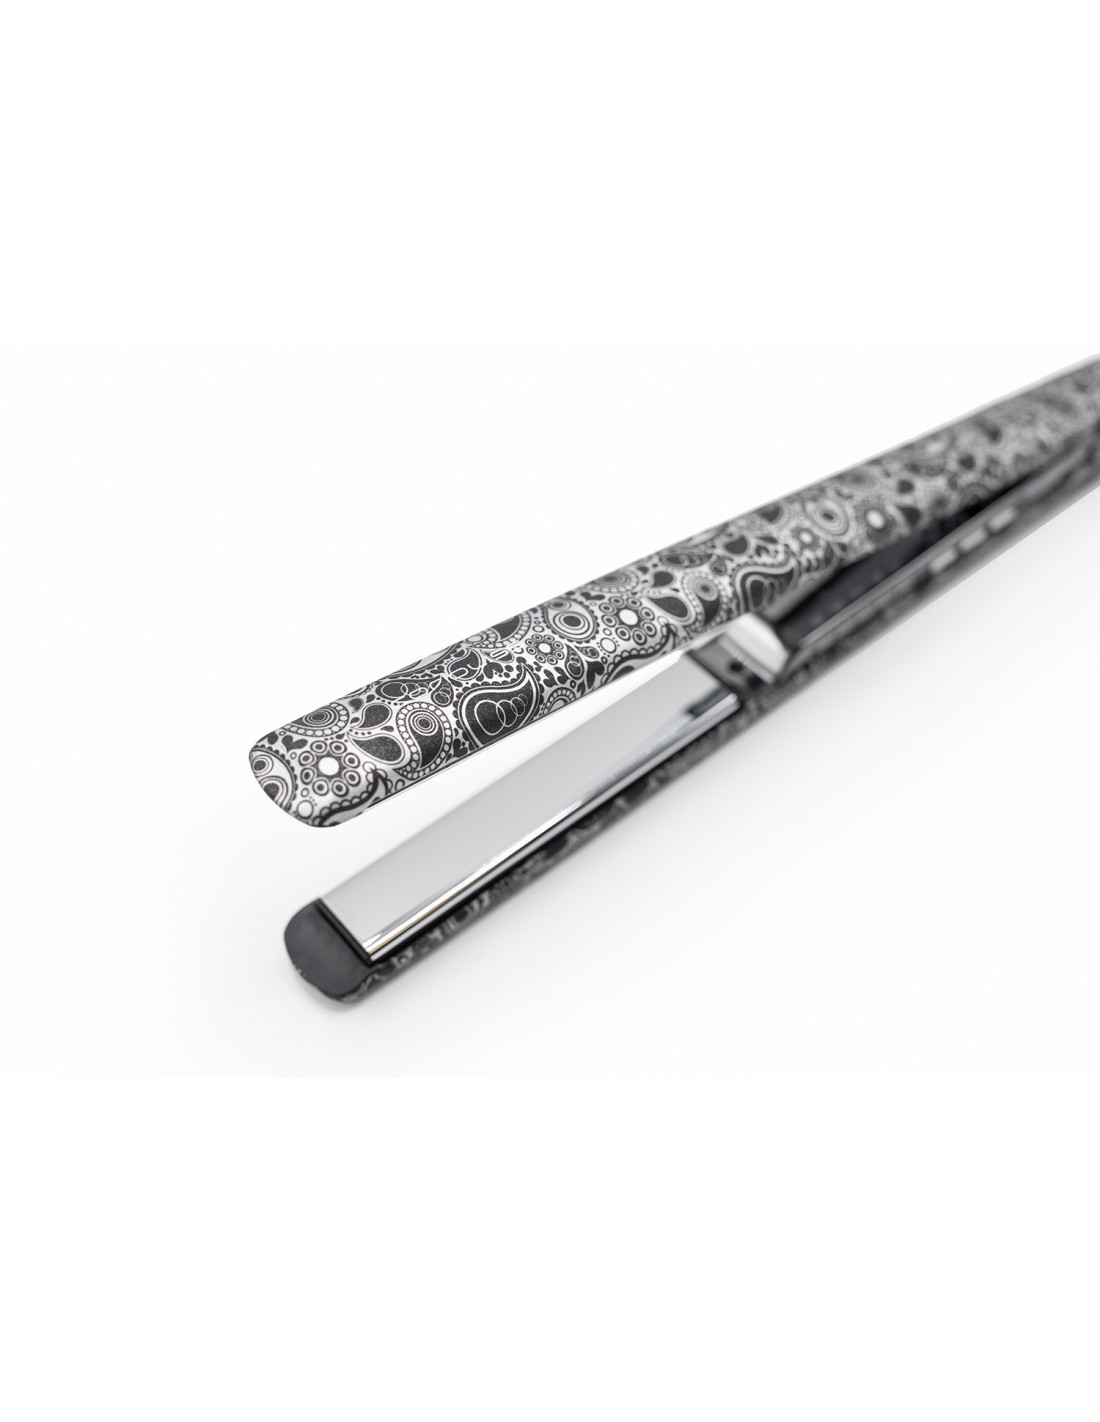 Corioliss C3 Silver Paisley Soft Touch